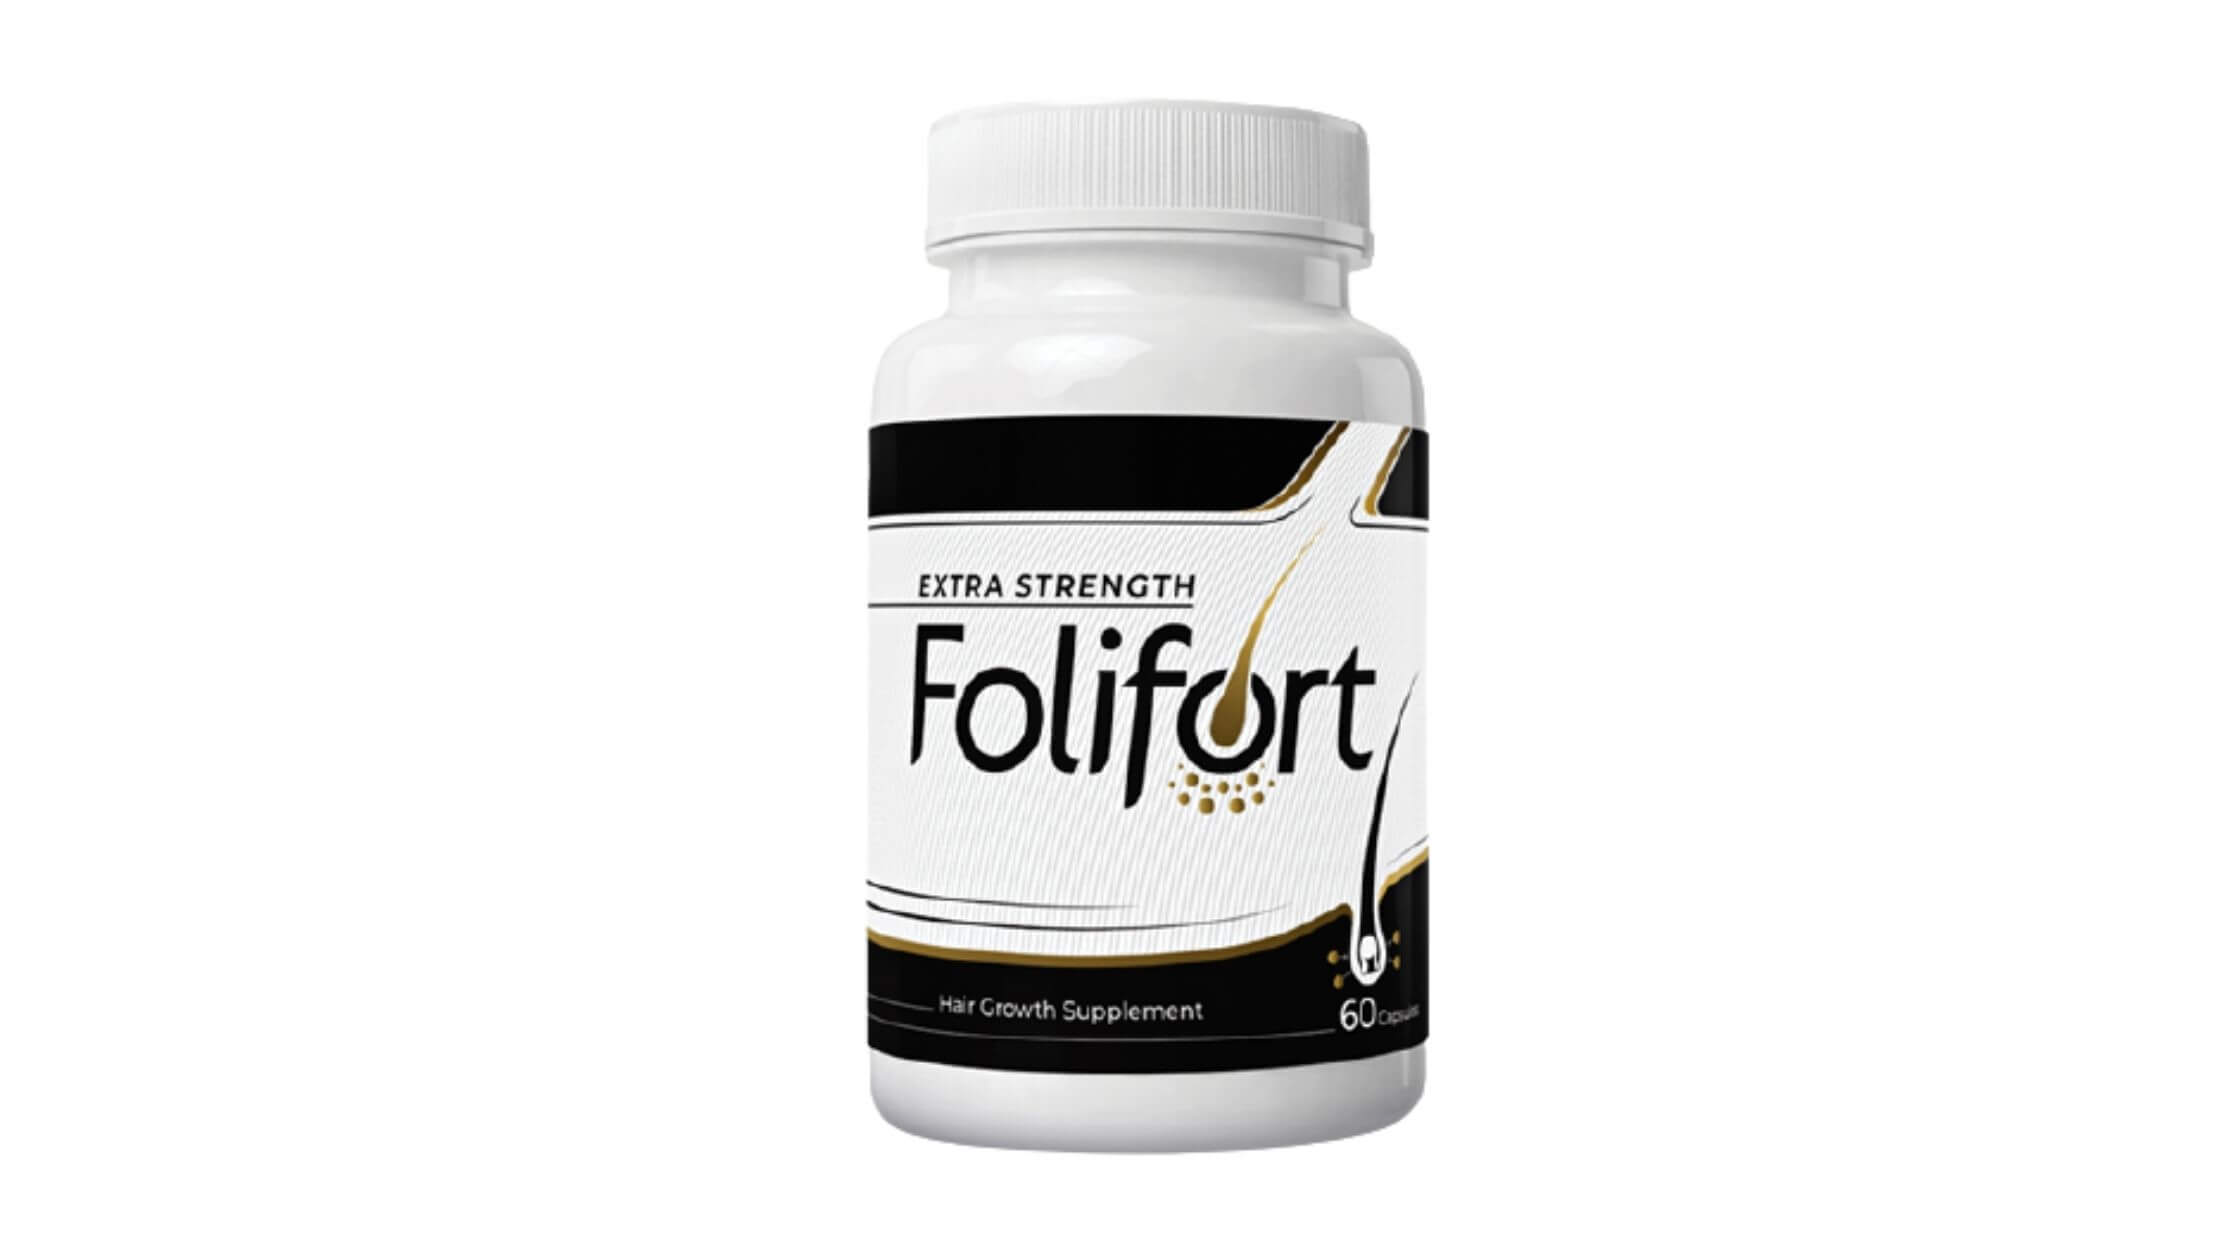 Folifort made with completely natural products